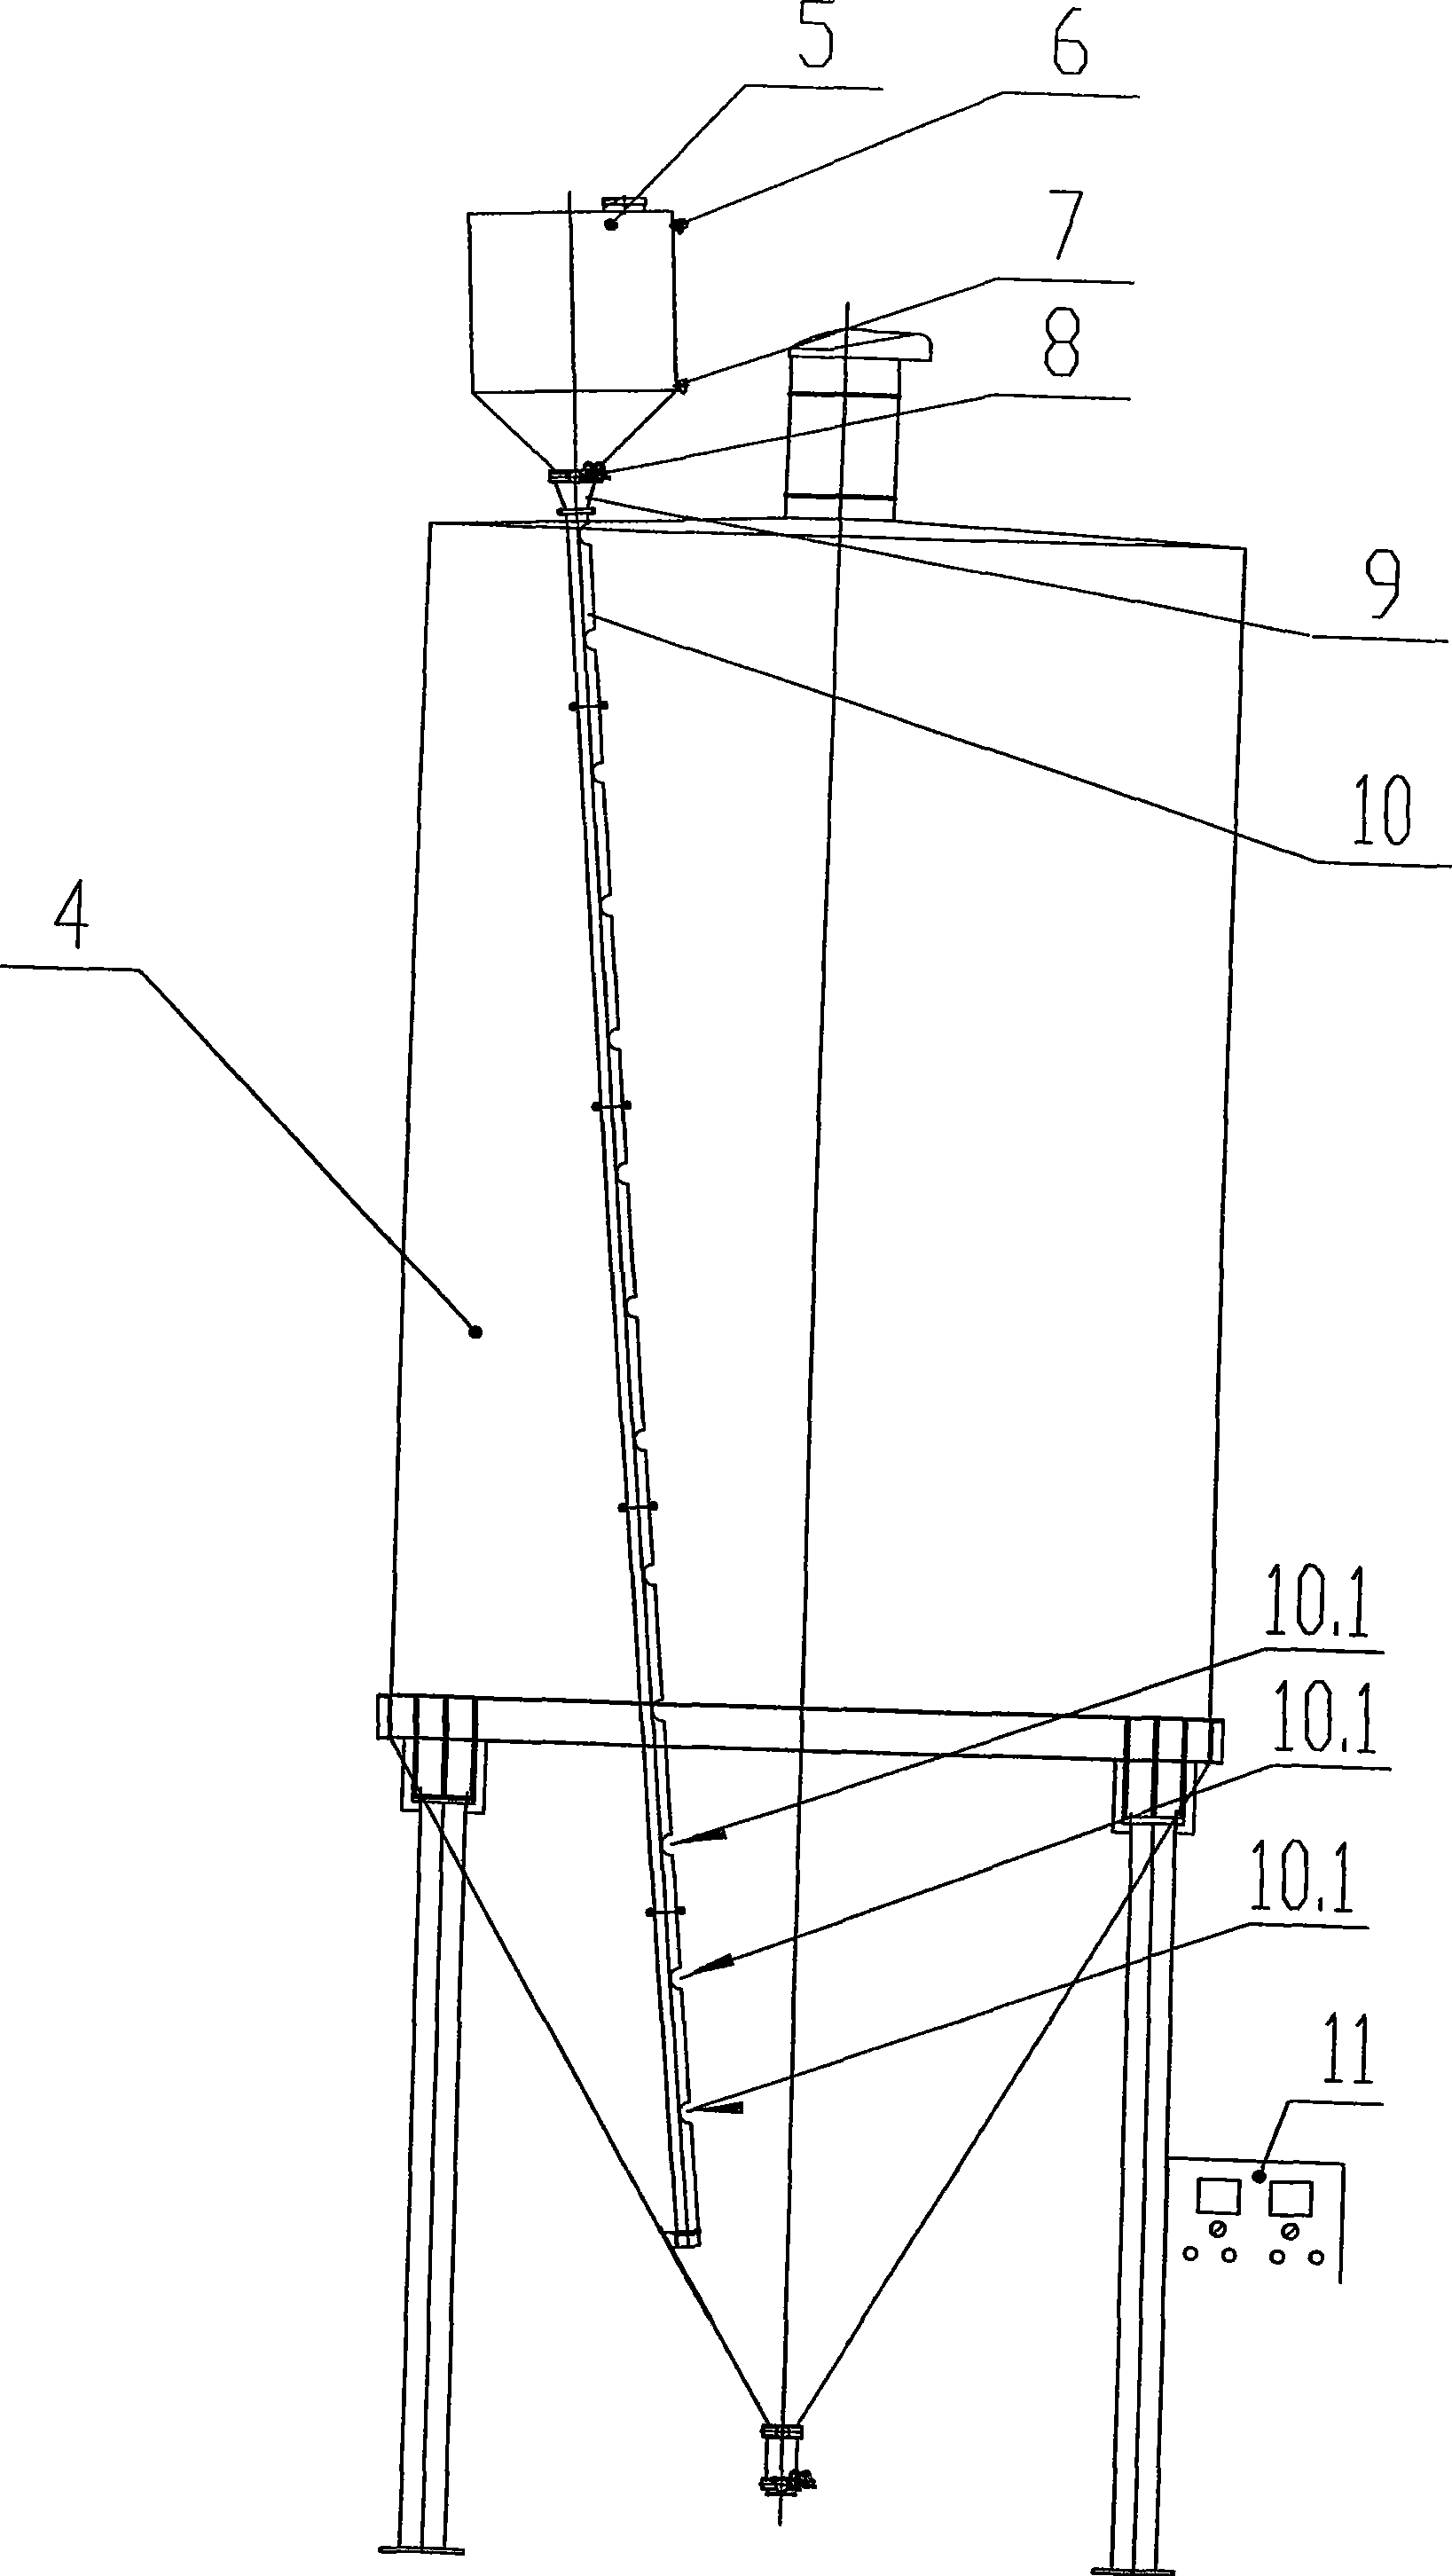 High discharge device for loose unpacked material